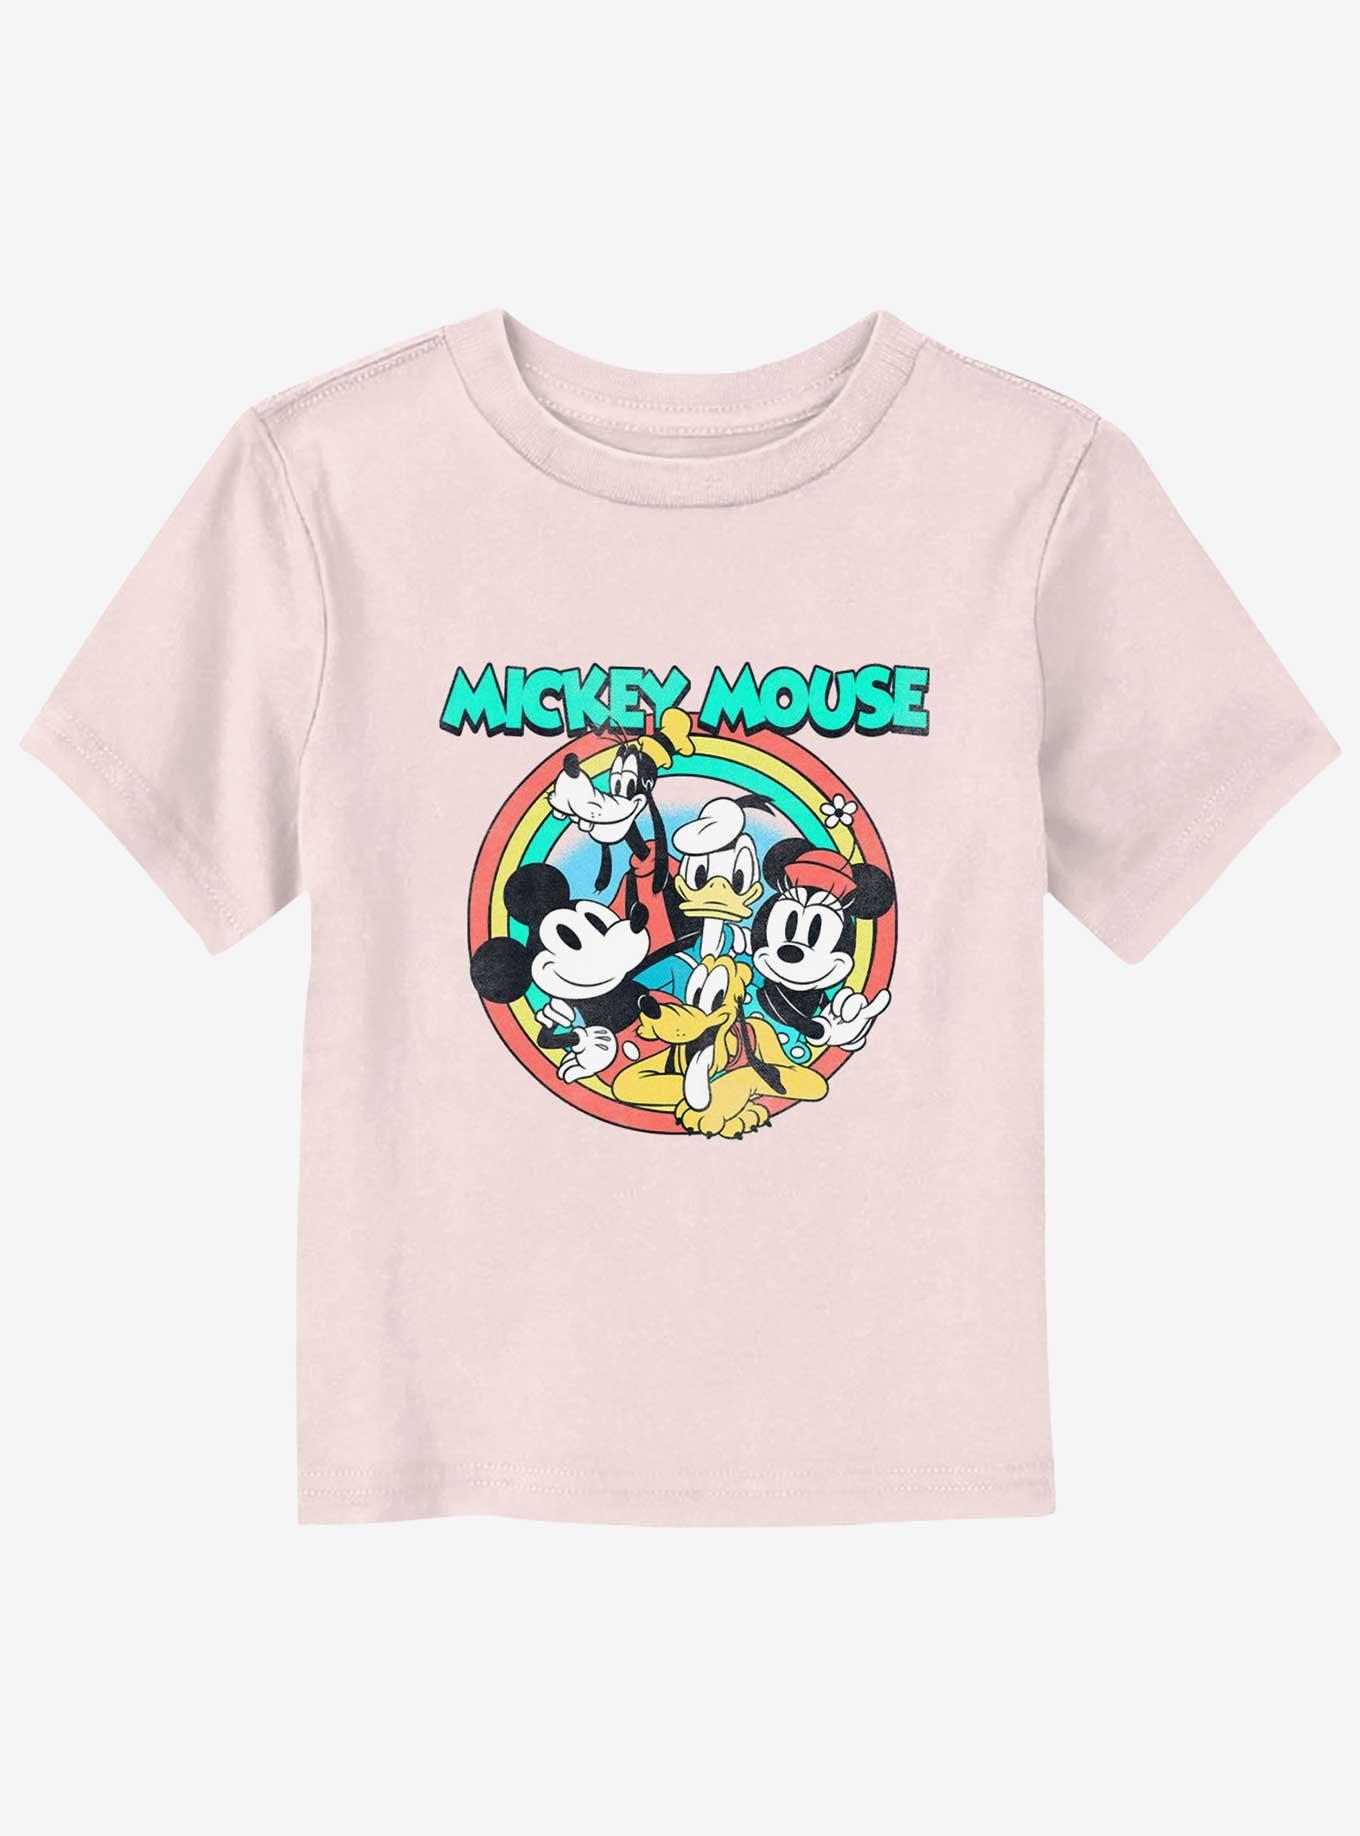 Disney Mickey Mouse & Friends Pose Toddler T-Shirt, LIGHT PINK, hi-res